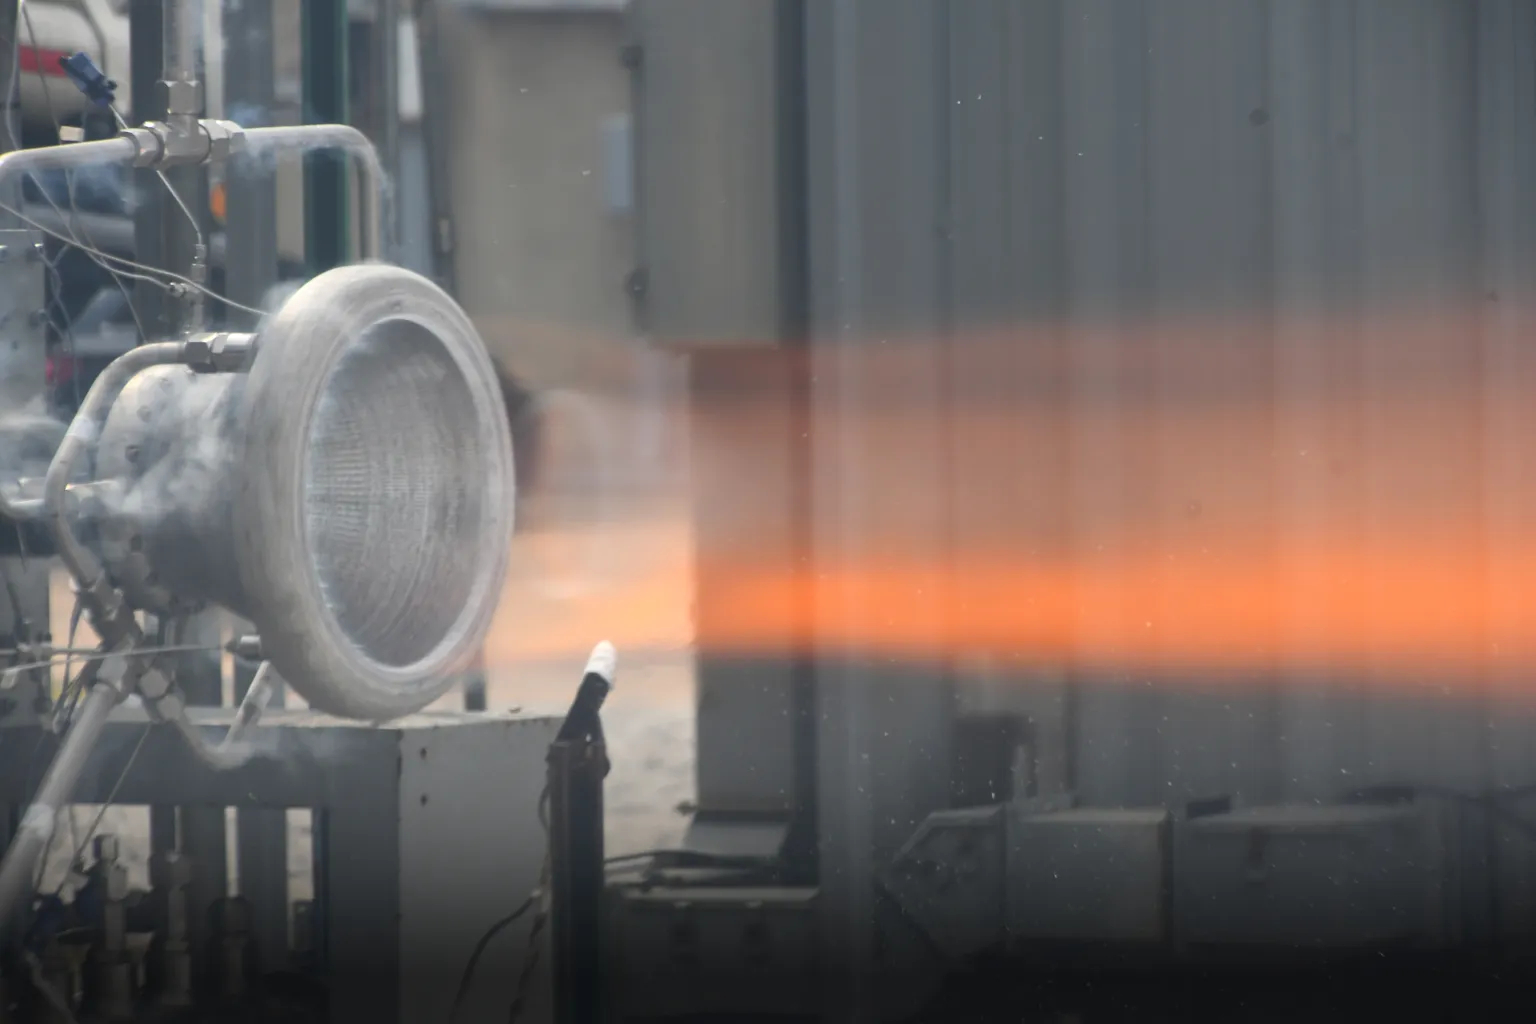 NASA’s 3D Printed Rocket Nozzle Ready For Deep Space